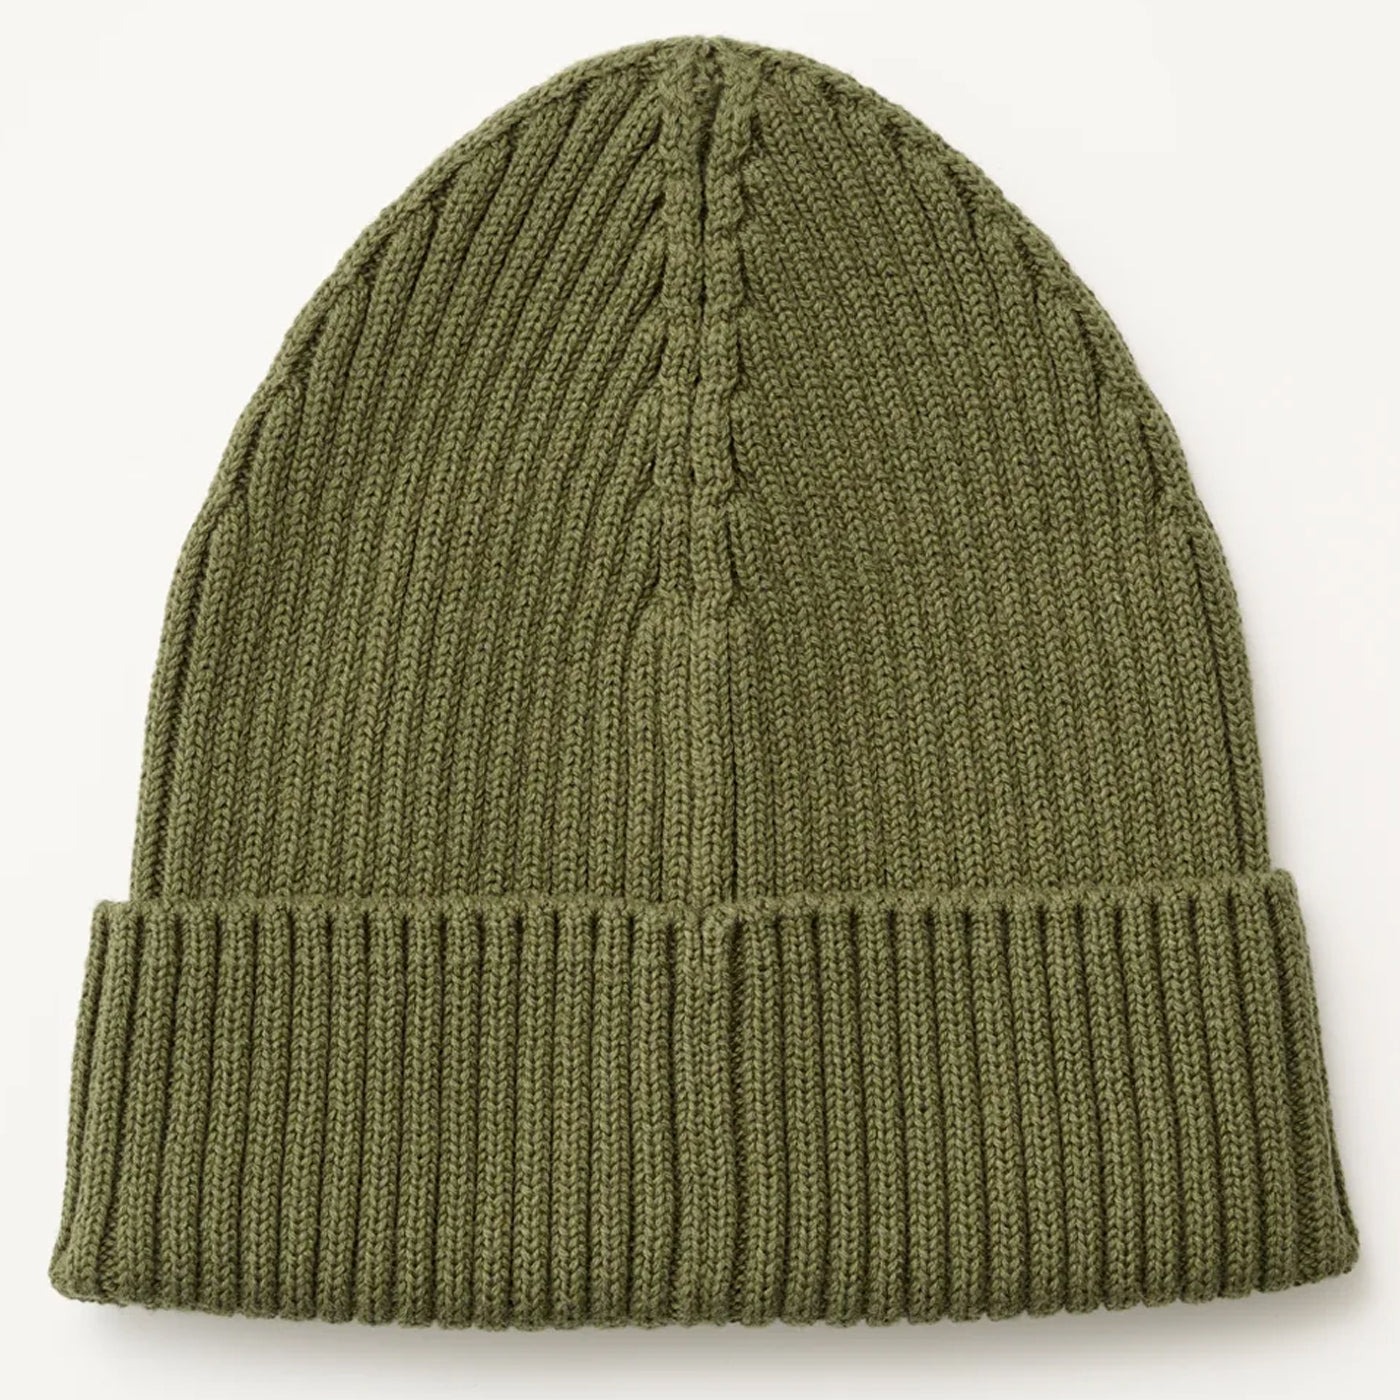 Winter hat Maap Evade 2.0 - Green | All4cycling